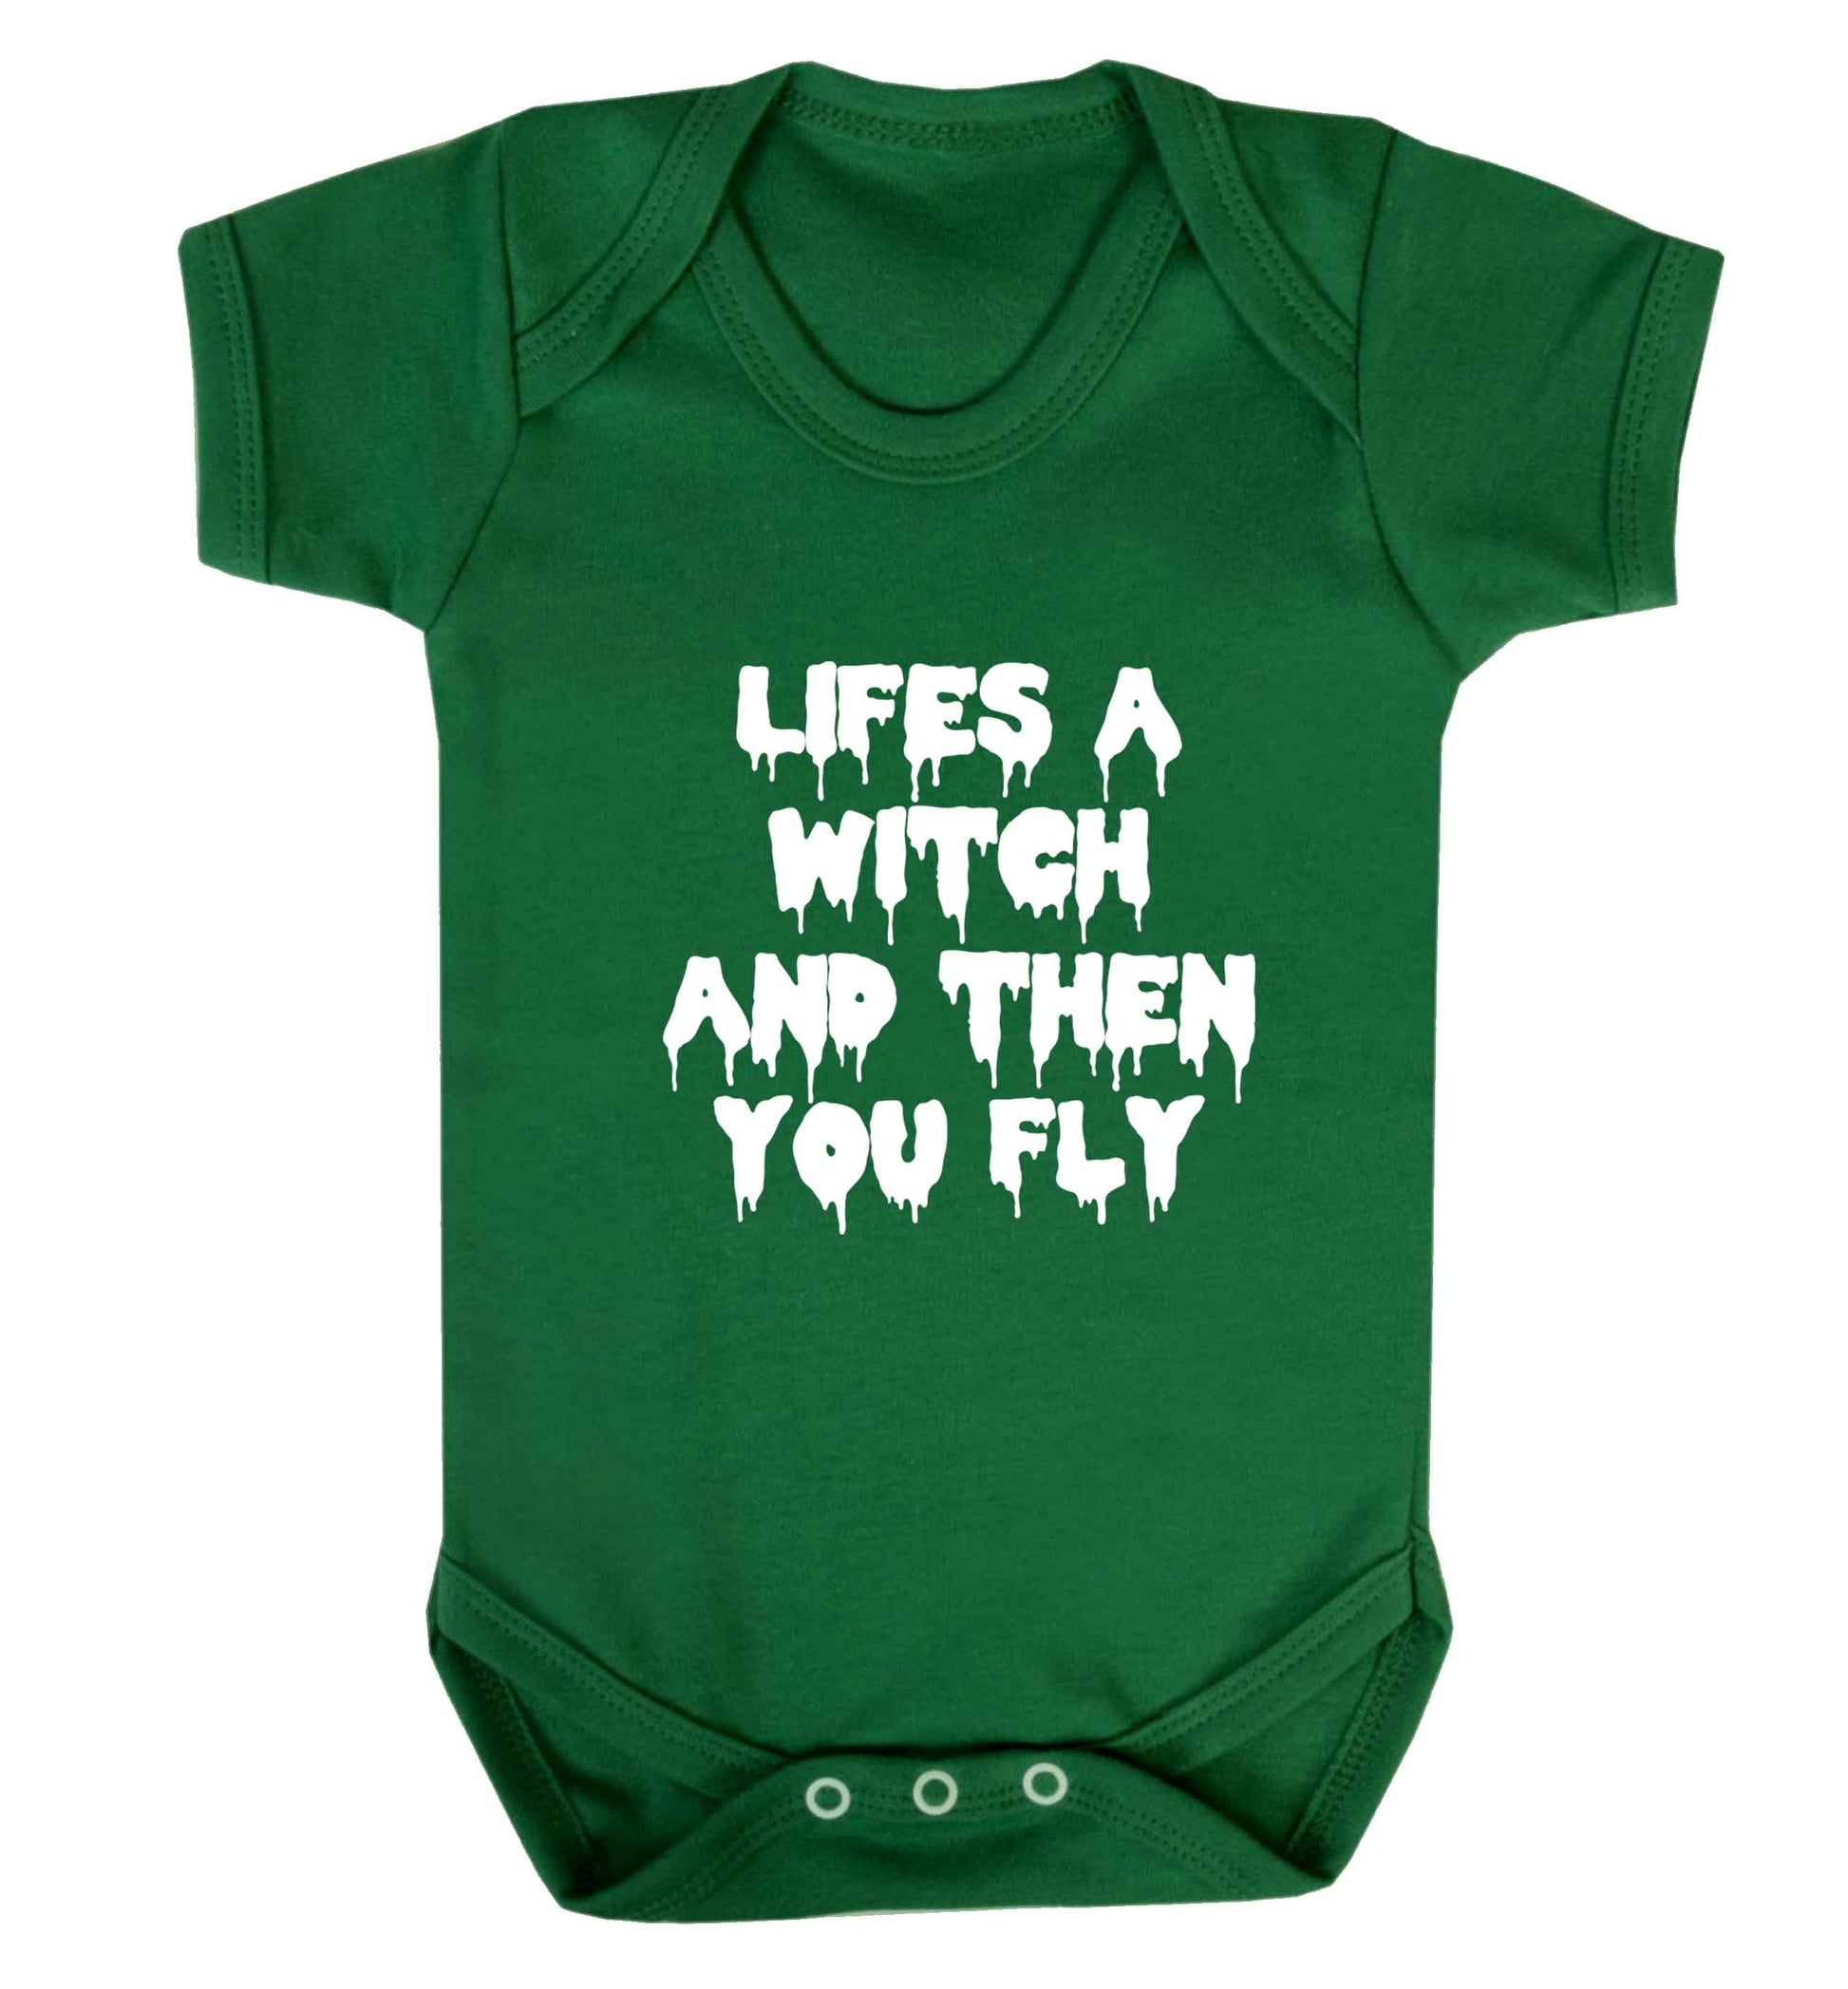 Life's a witch and then you fly baby vest green 18-24 months